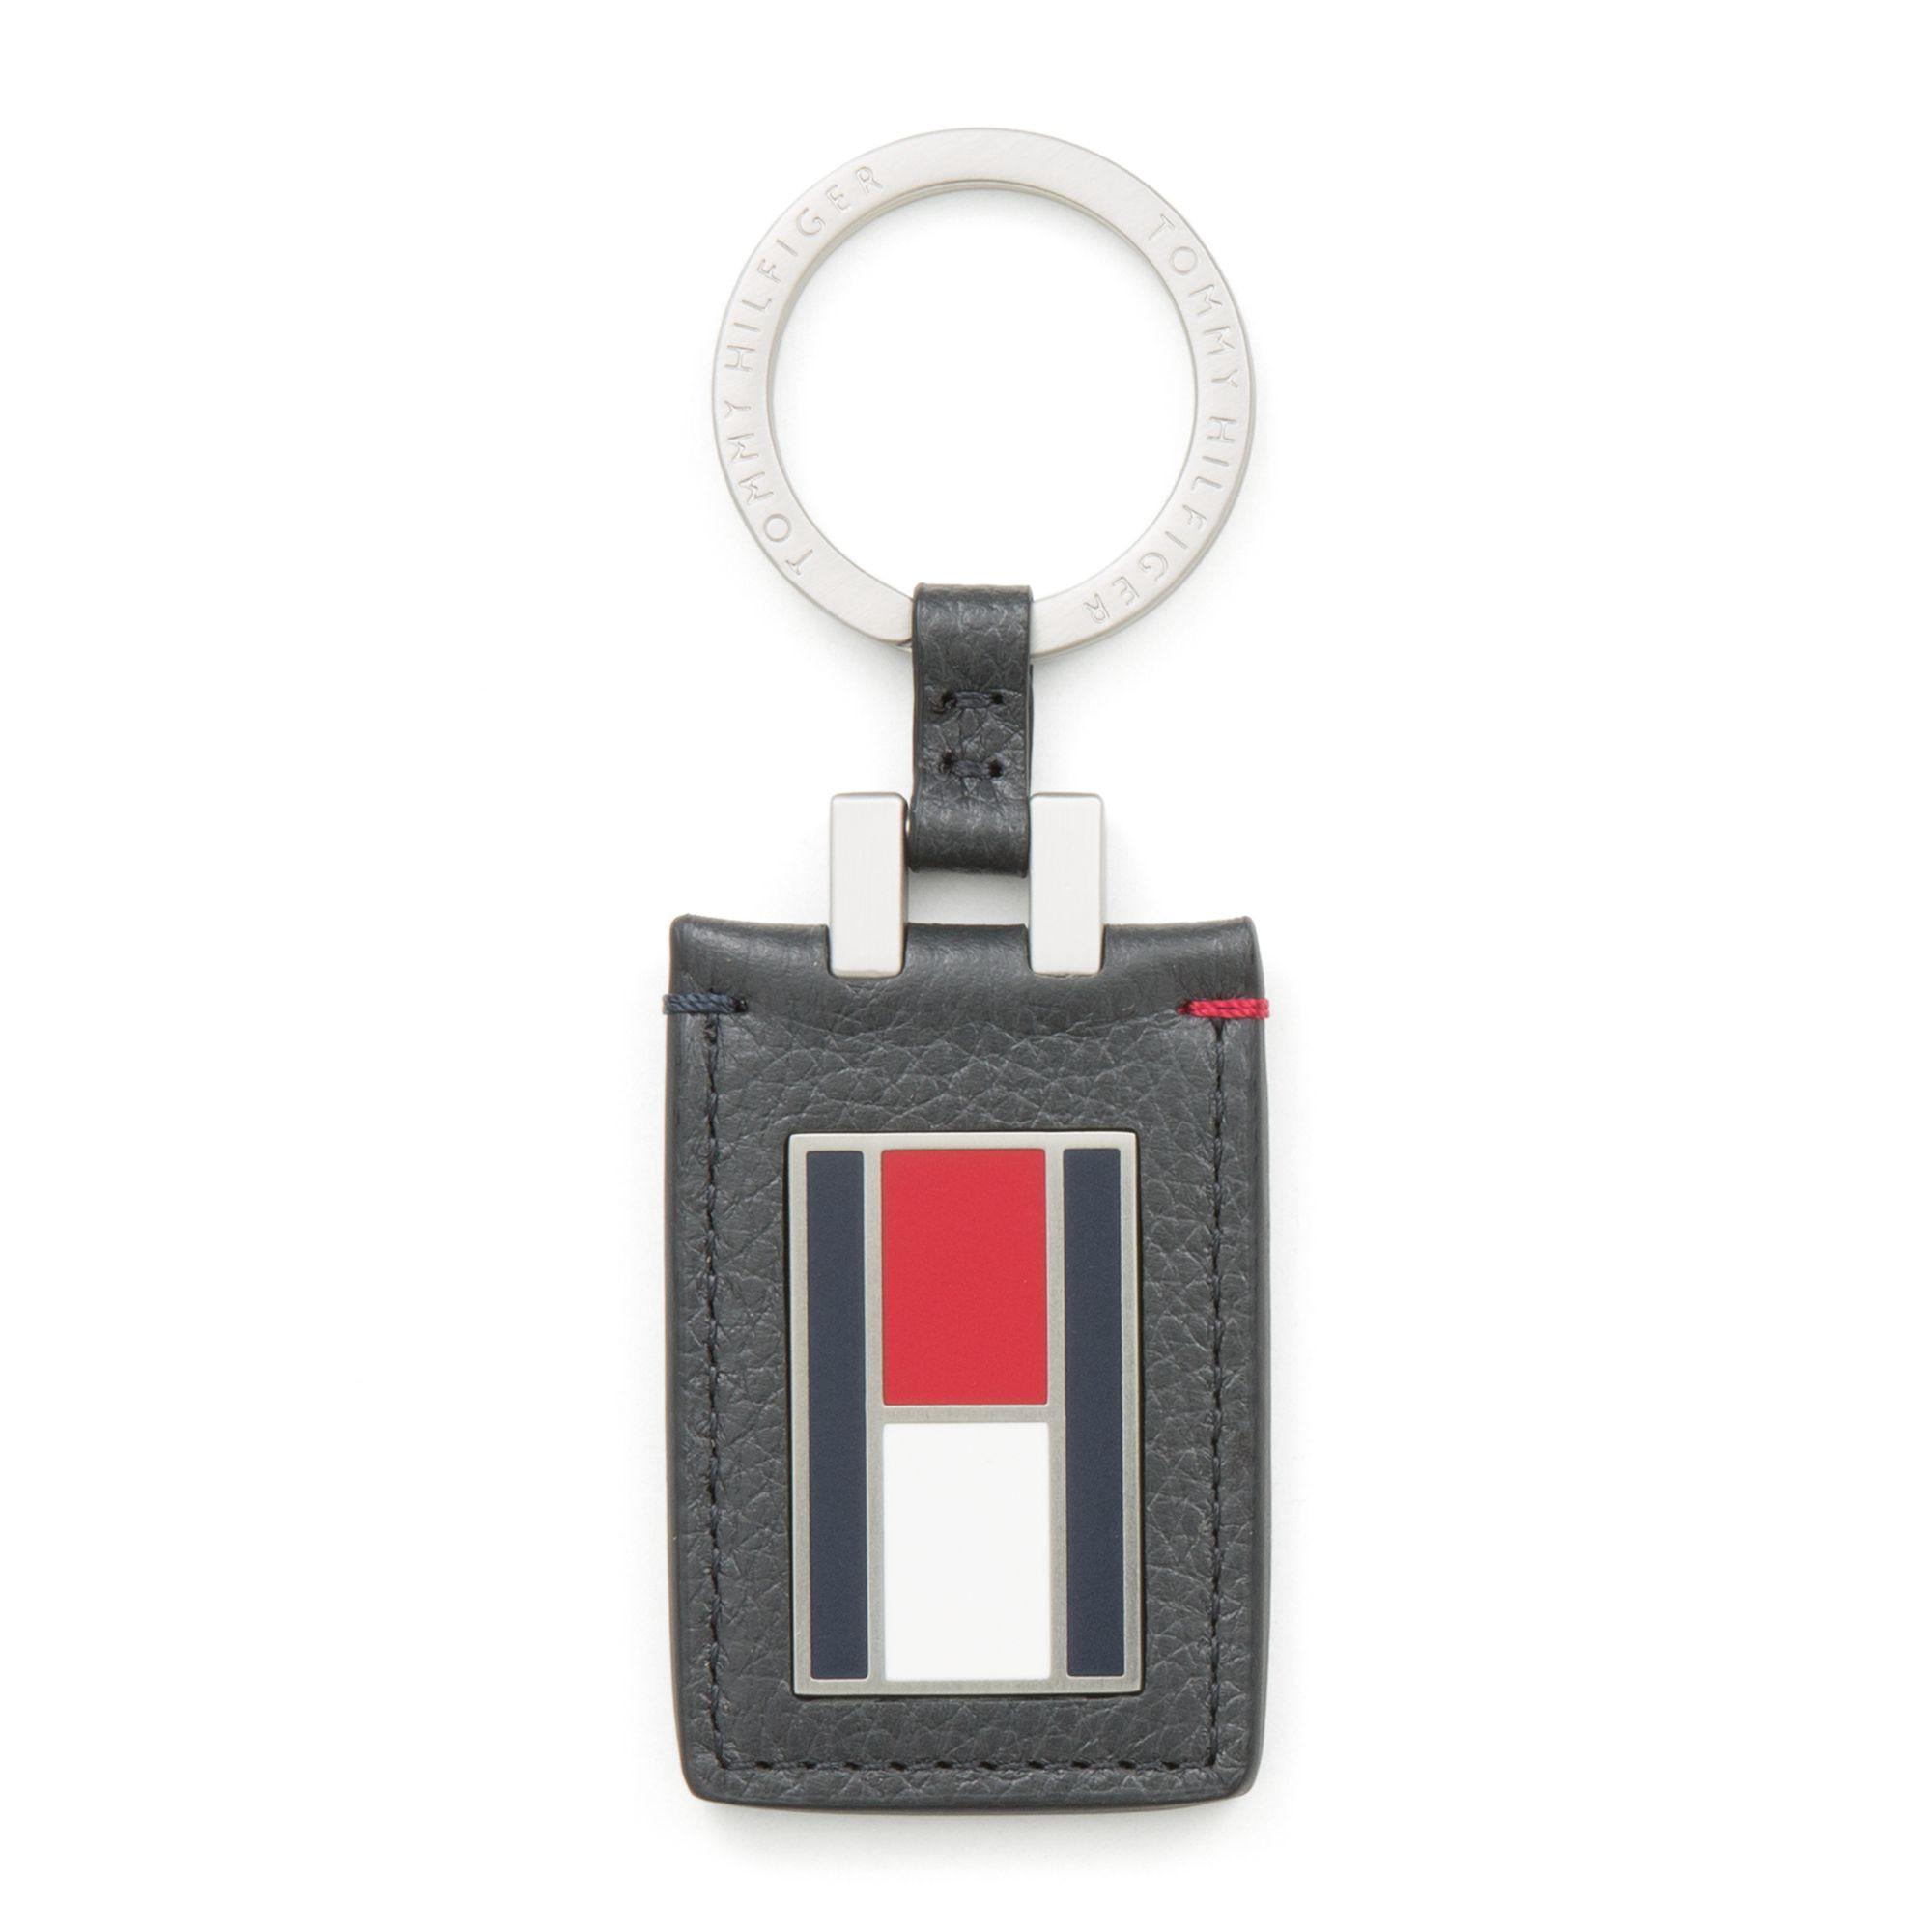 Tommy Hilfiger Key Ring on Sale - anuariocidob.org 1689162641